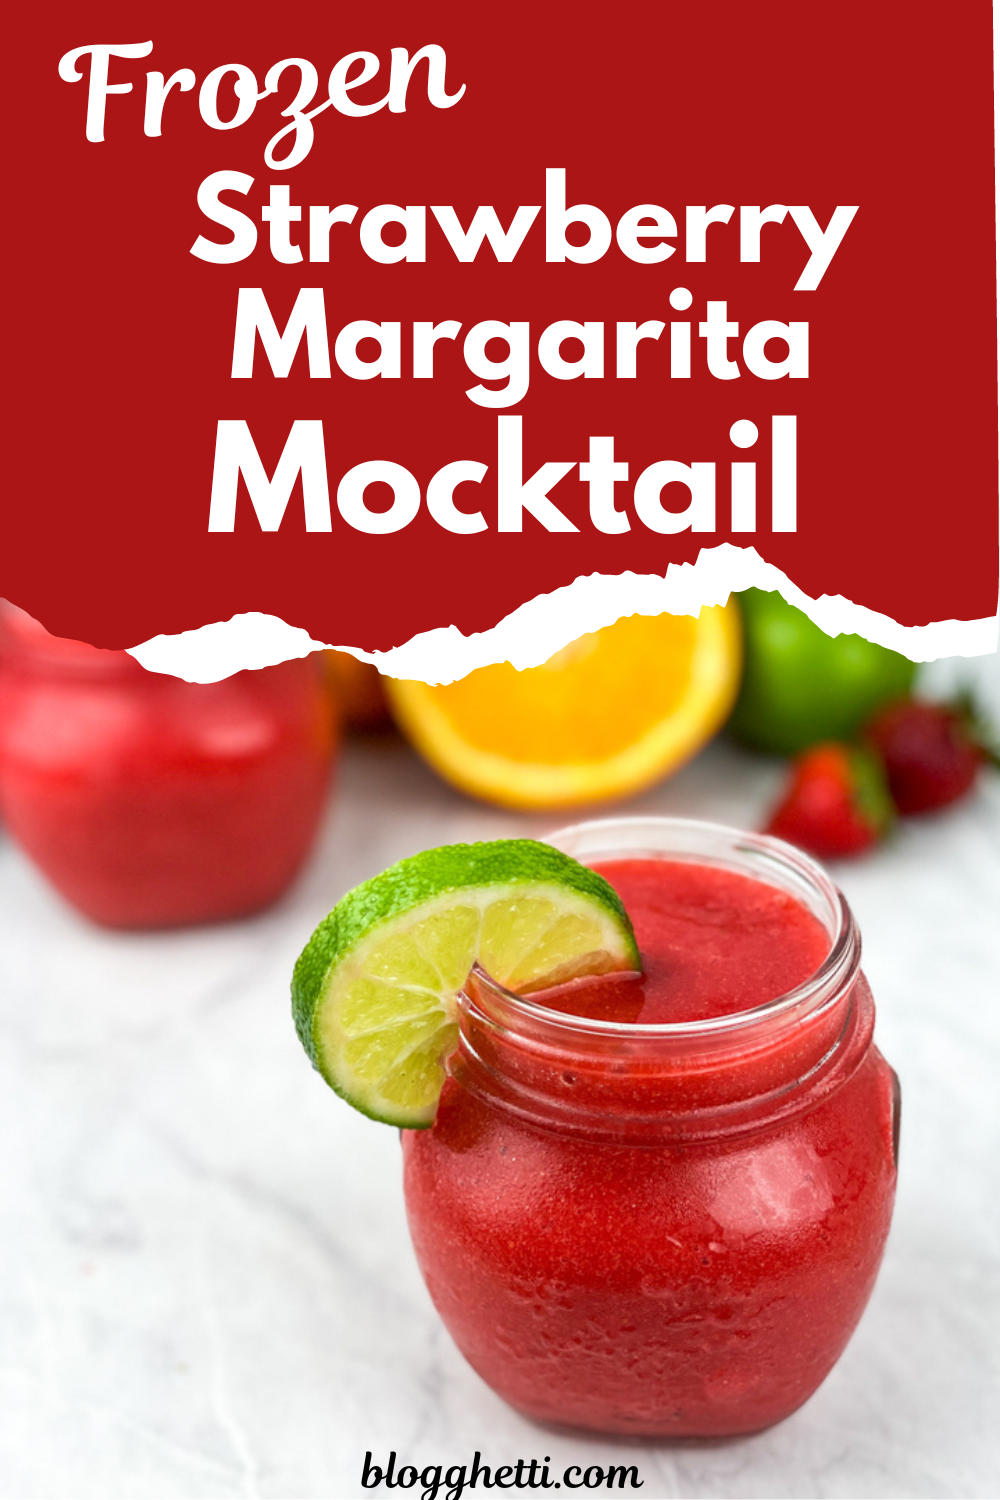 frozen strawberry margarita mocktail image with text